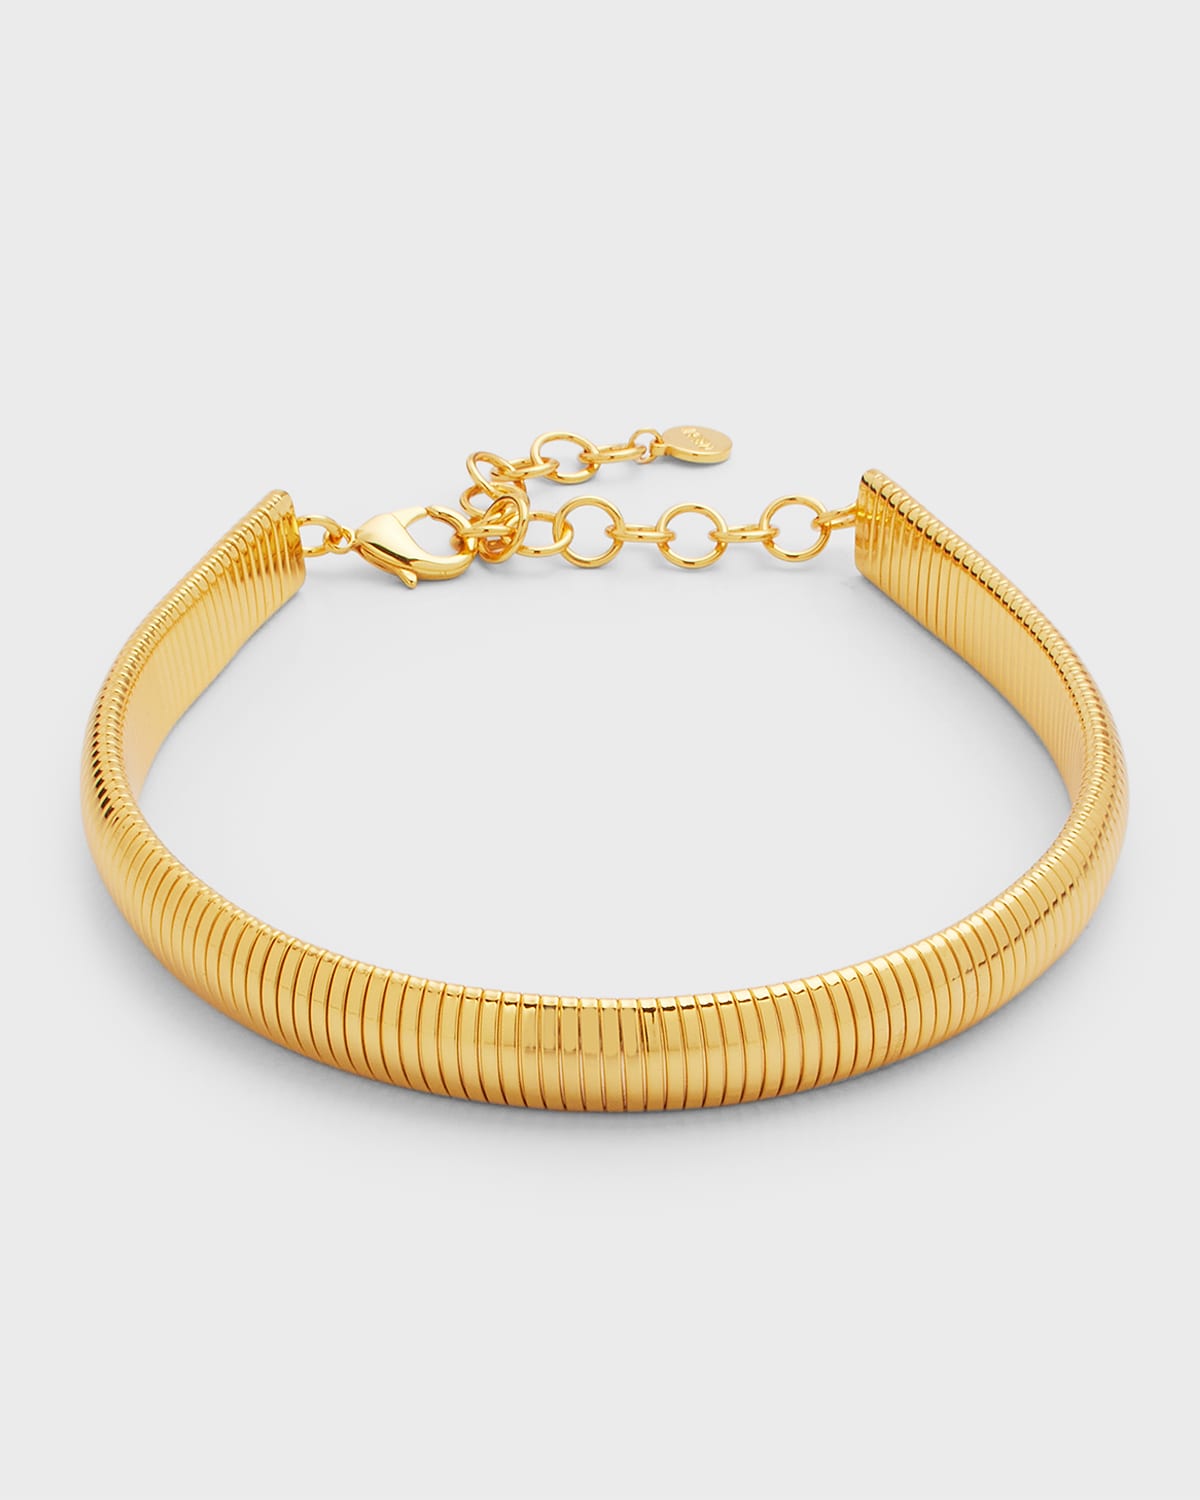 22k Gold-Plated Snake Chain Choker Necklace